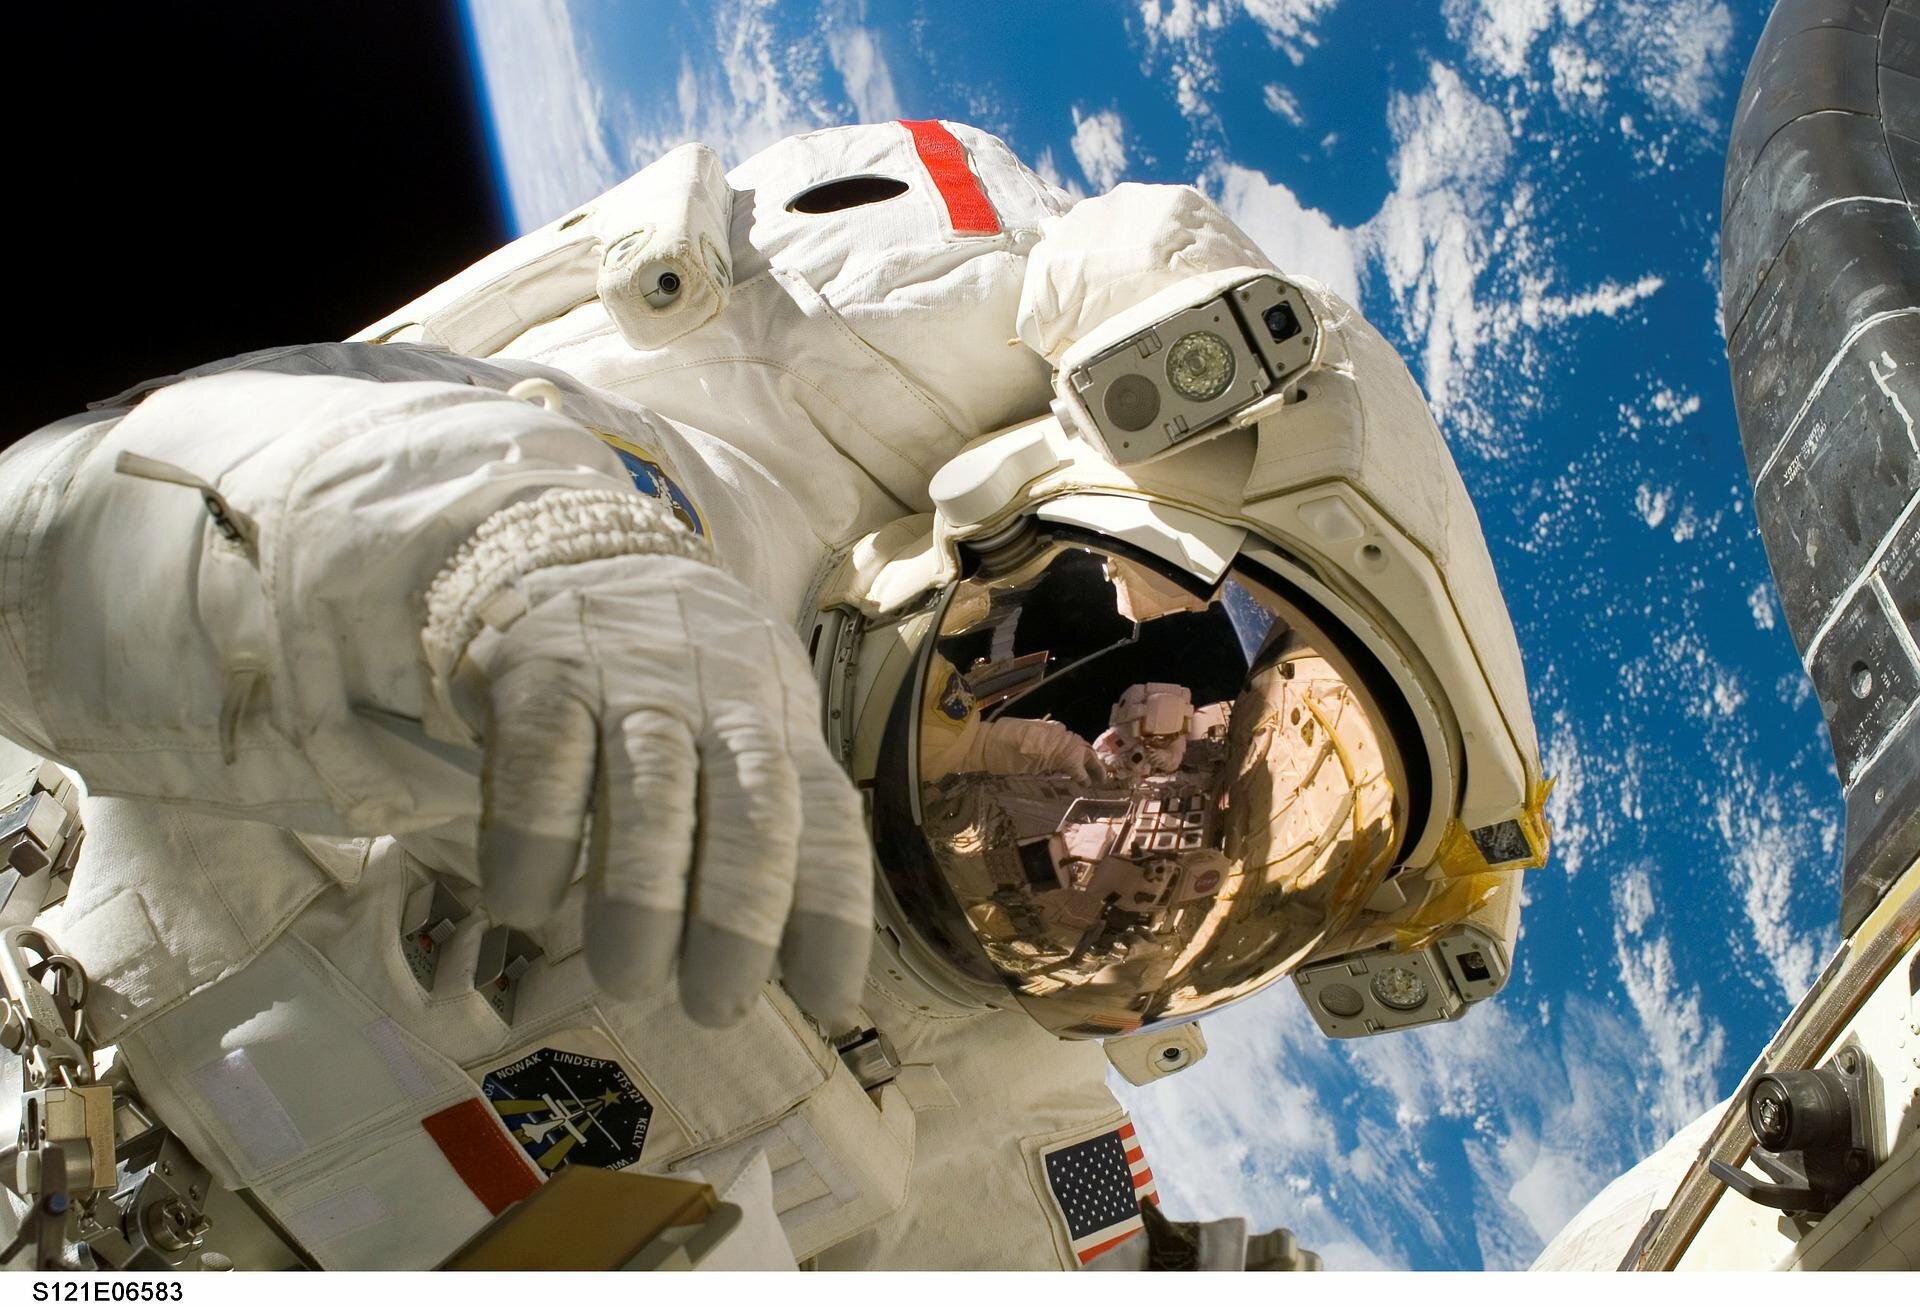 Making oxygen with magnets could help astronauts breathe easy